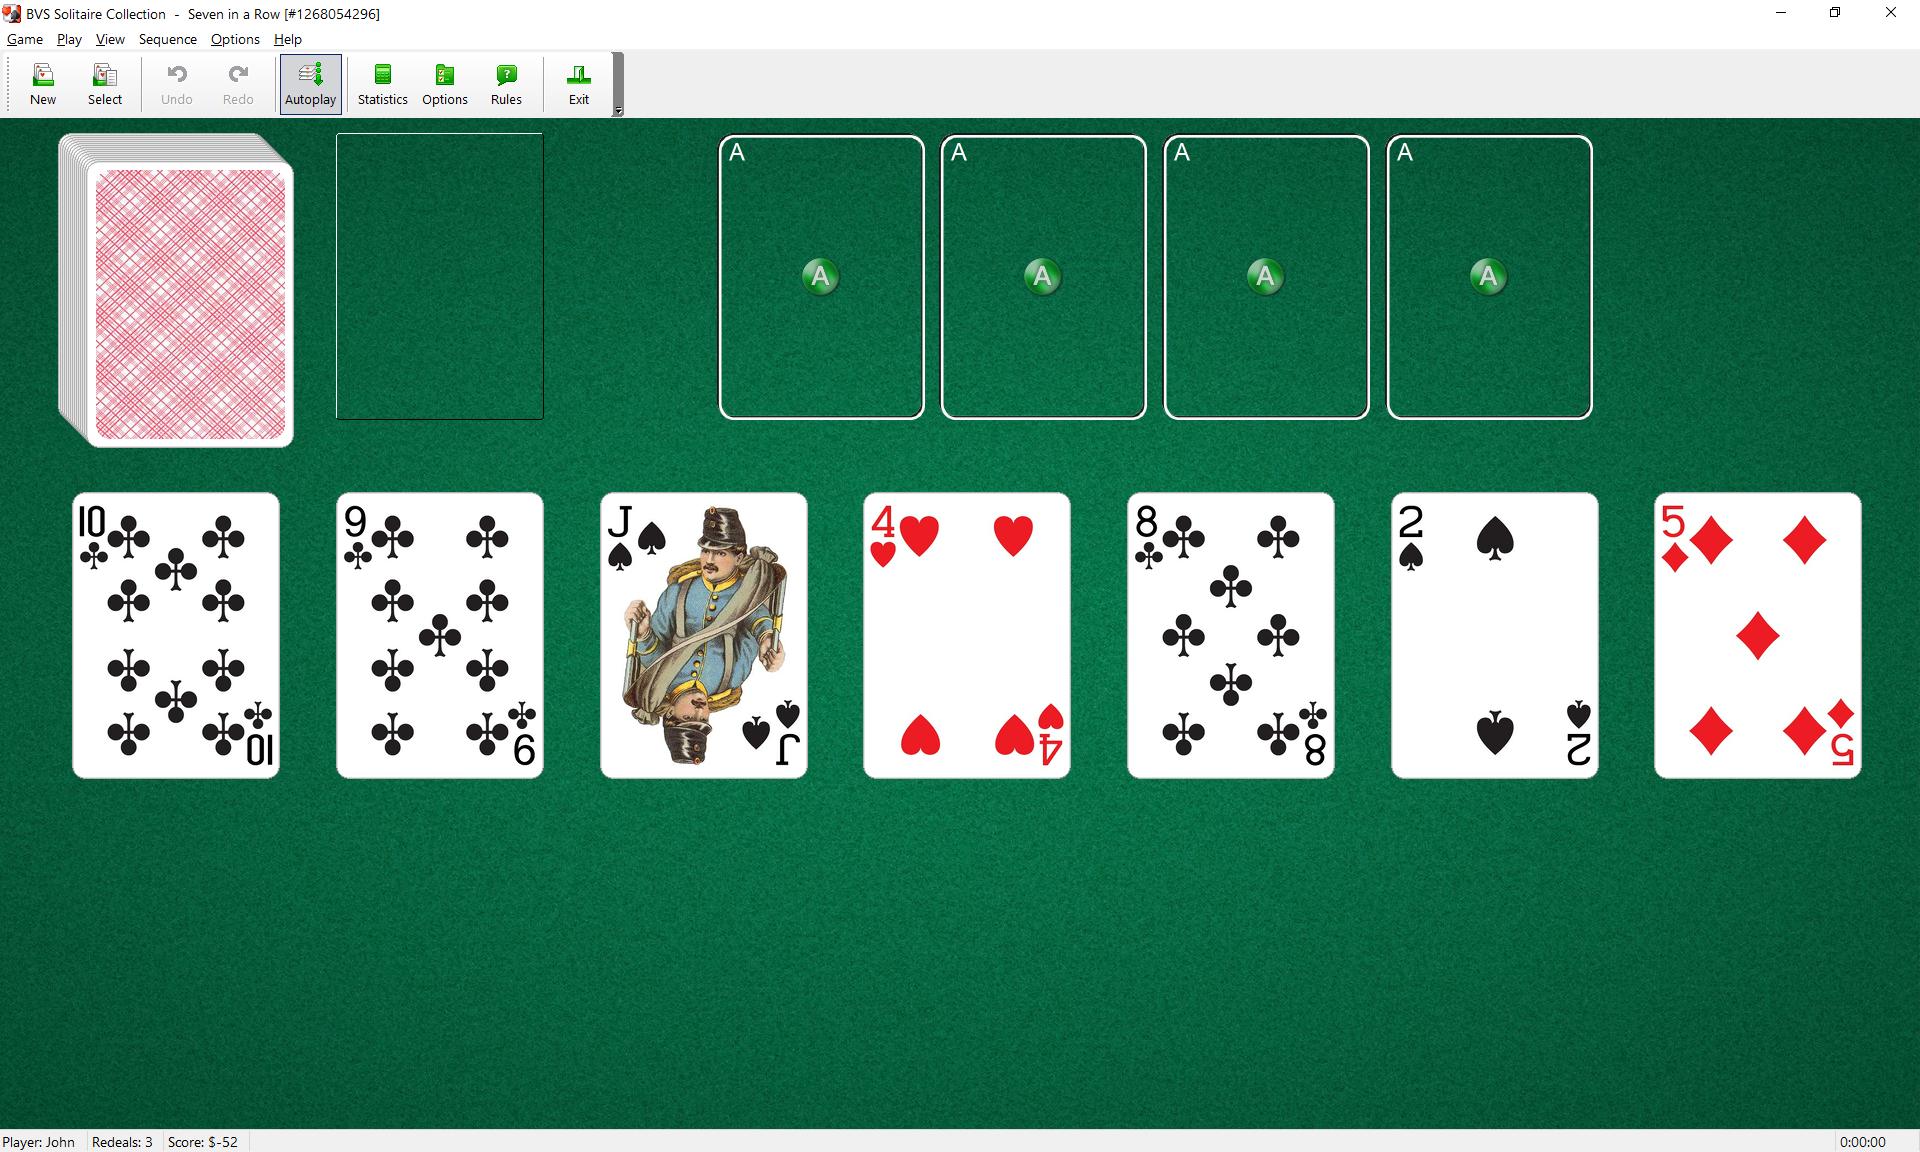 What are the odds of playing the same game of solitaire in a row